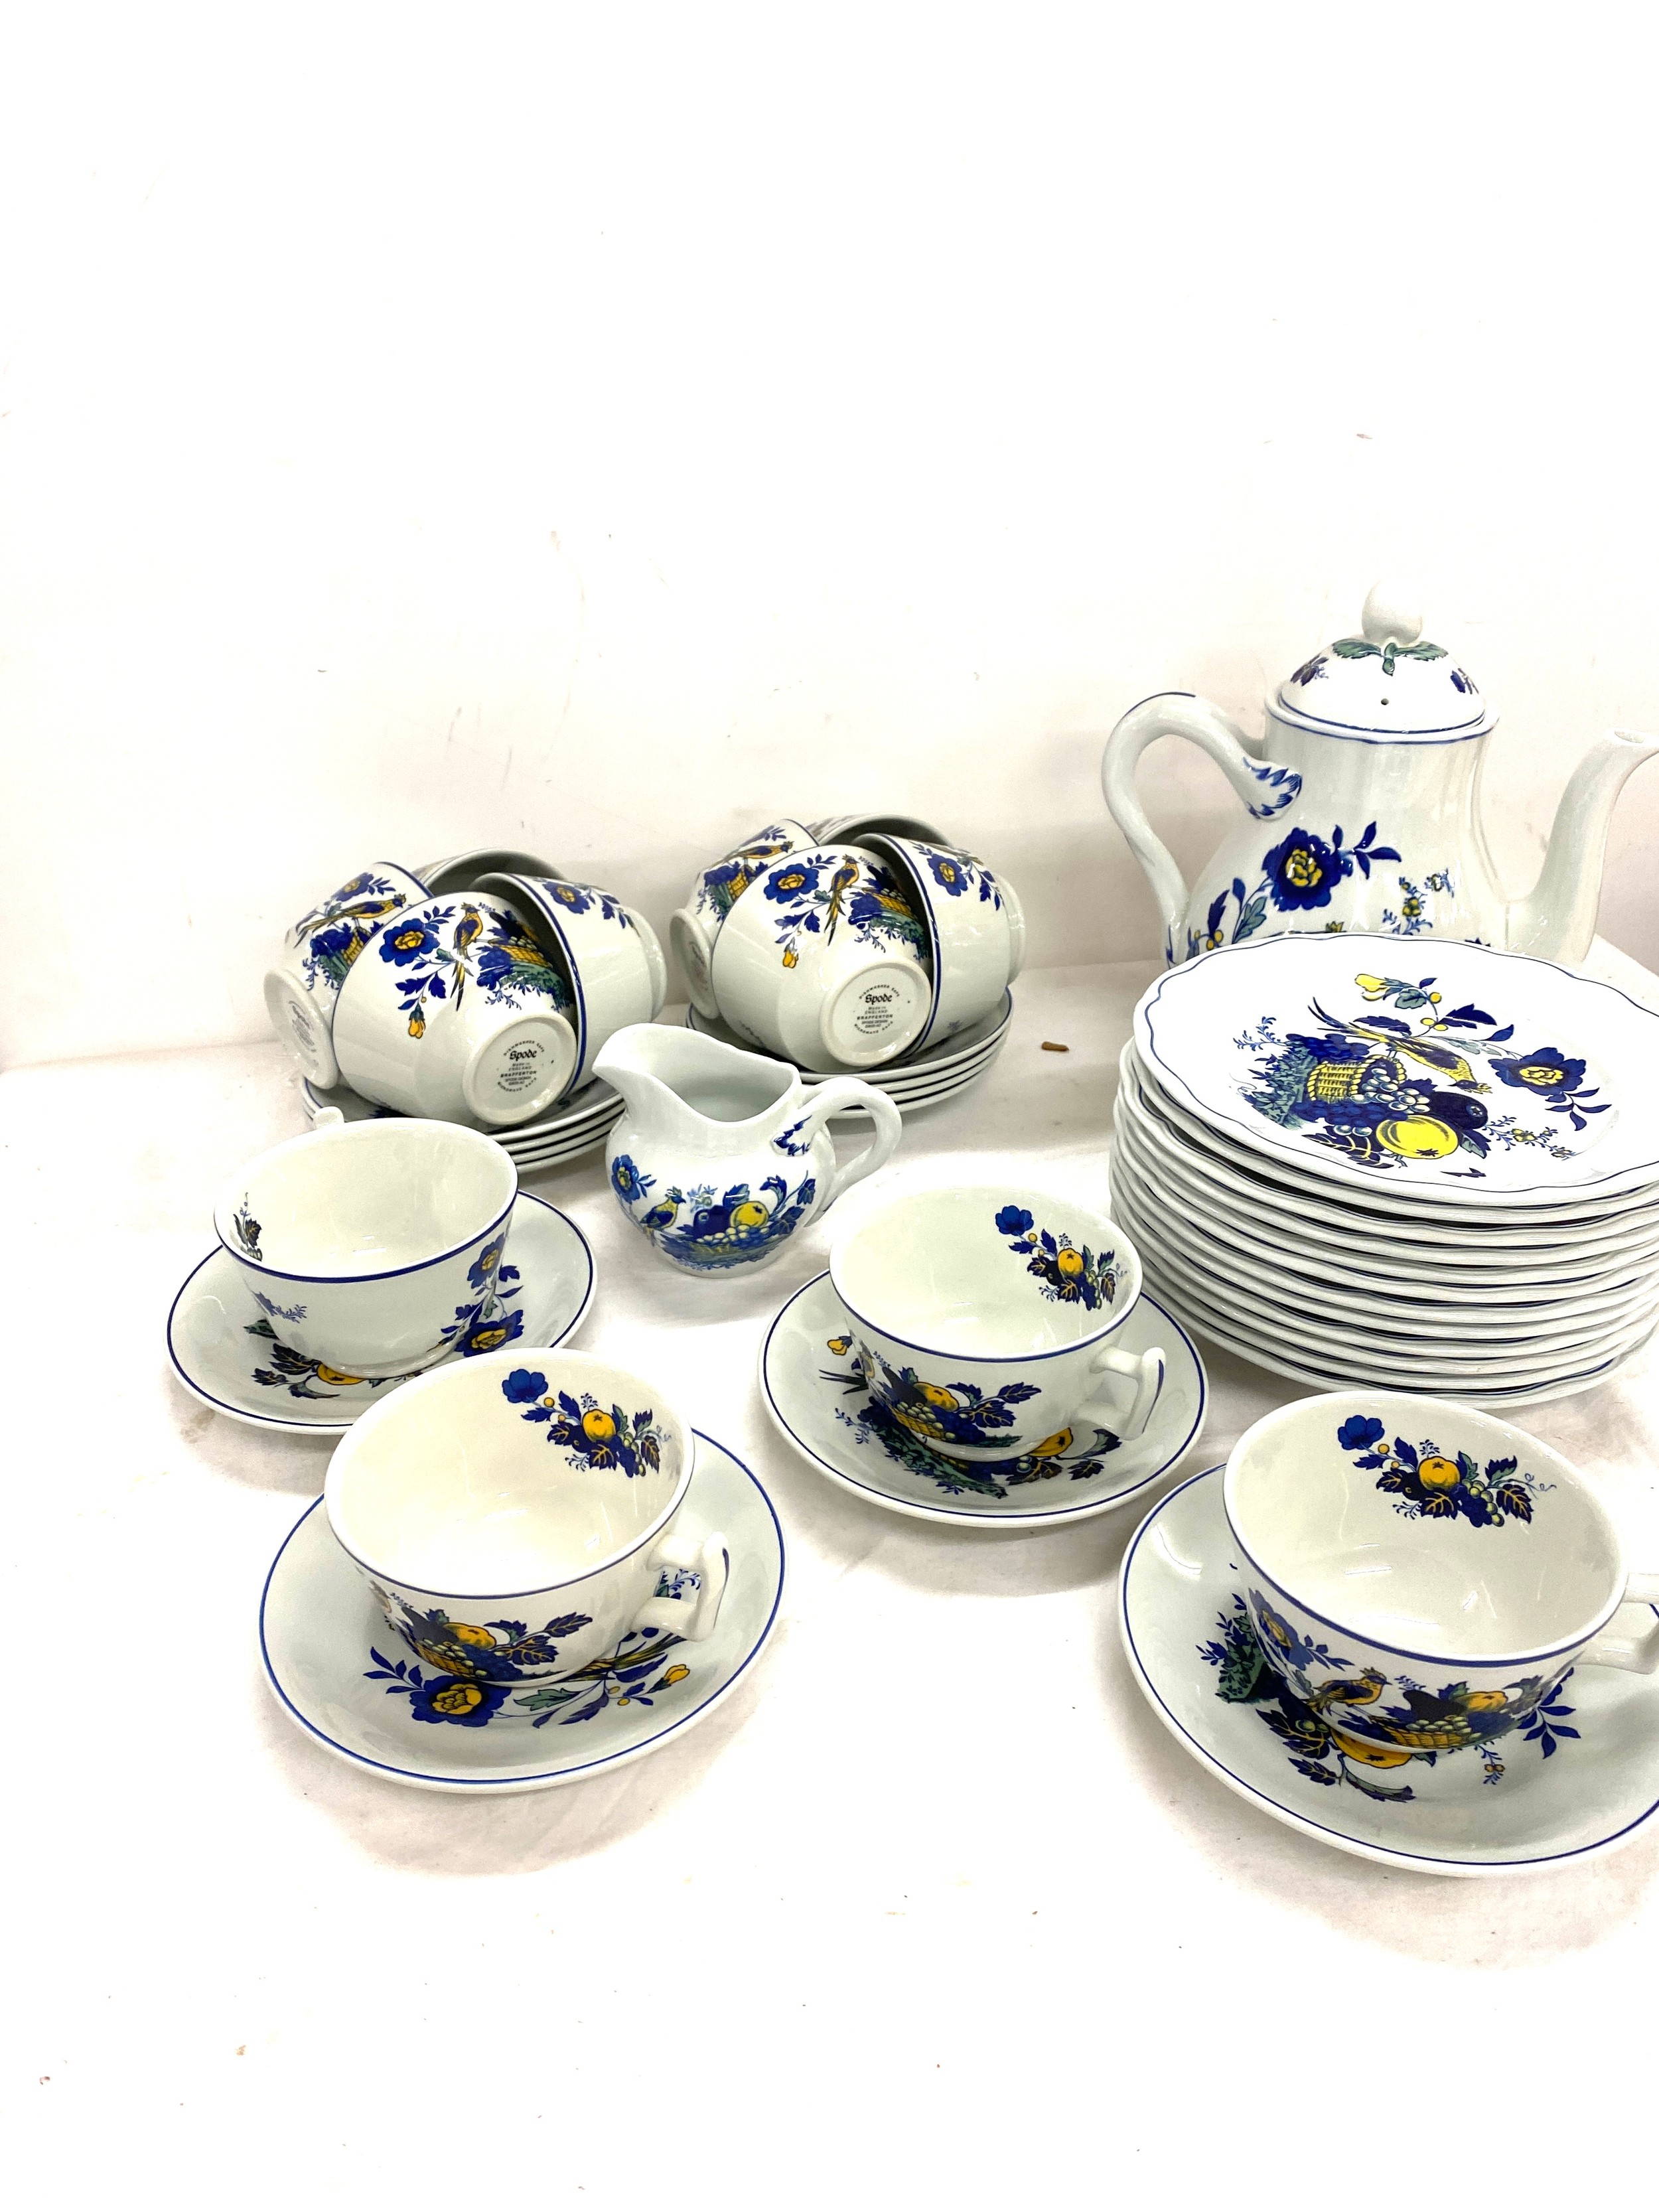 Spode Blue Bird s3274 c1838 - 16 cups 31 saucers coffee pot 7 side plates, 1 sandwich plate - Image 4 of 7